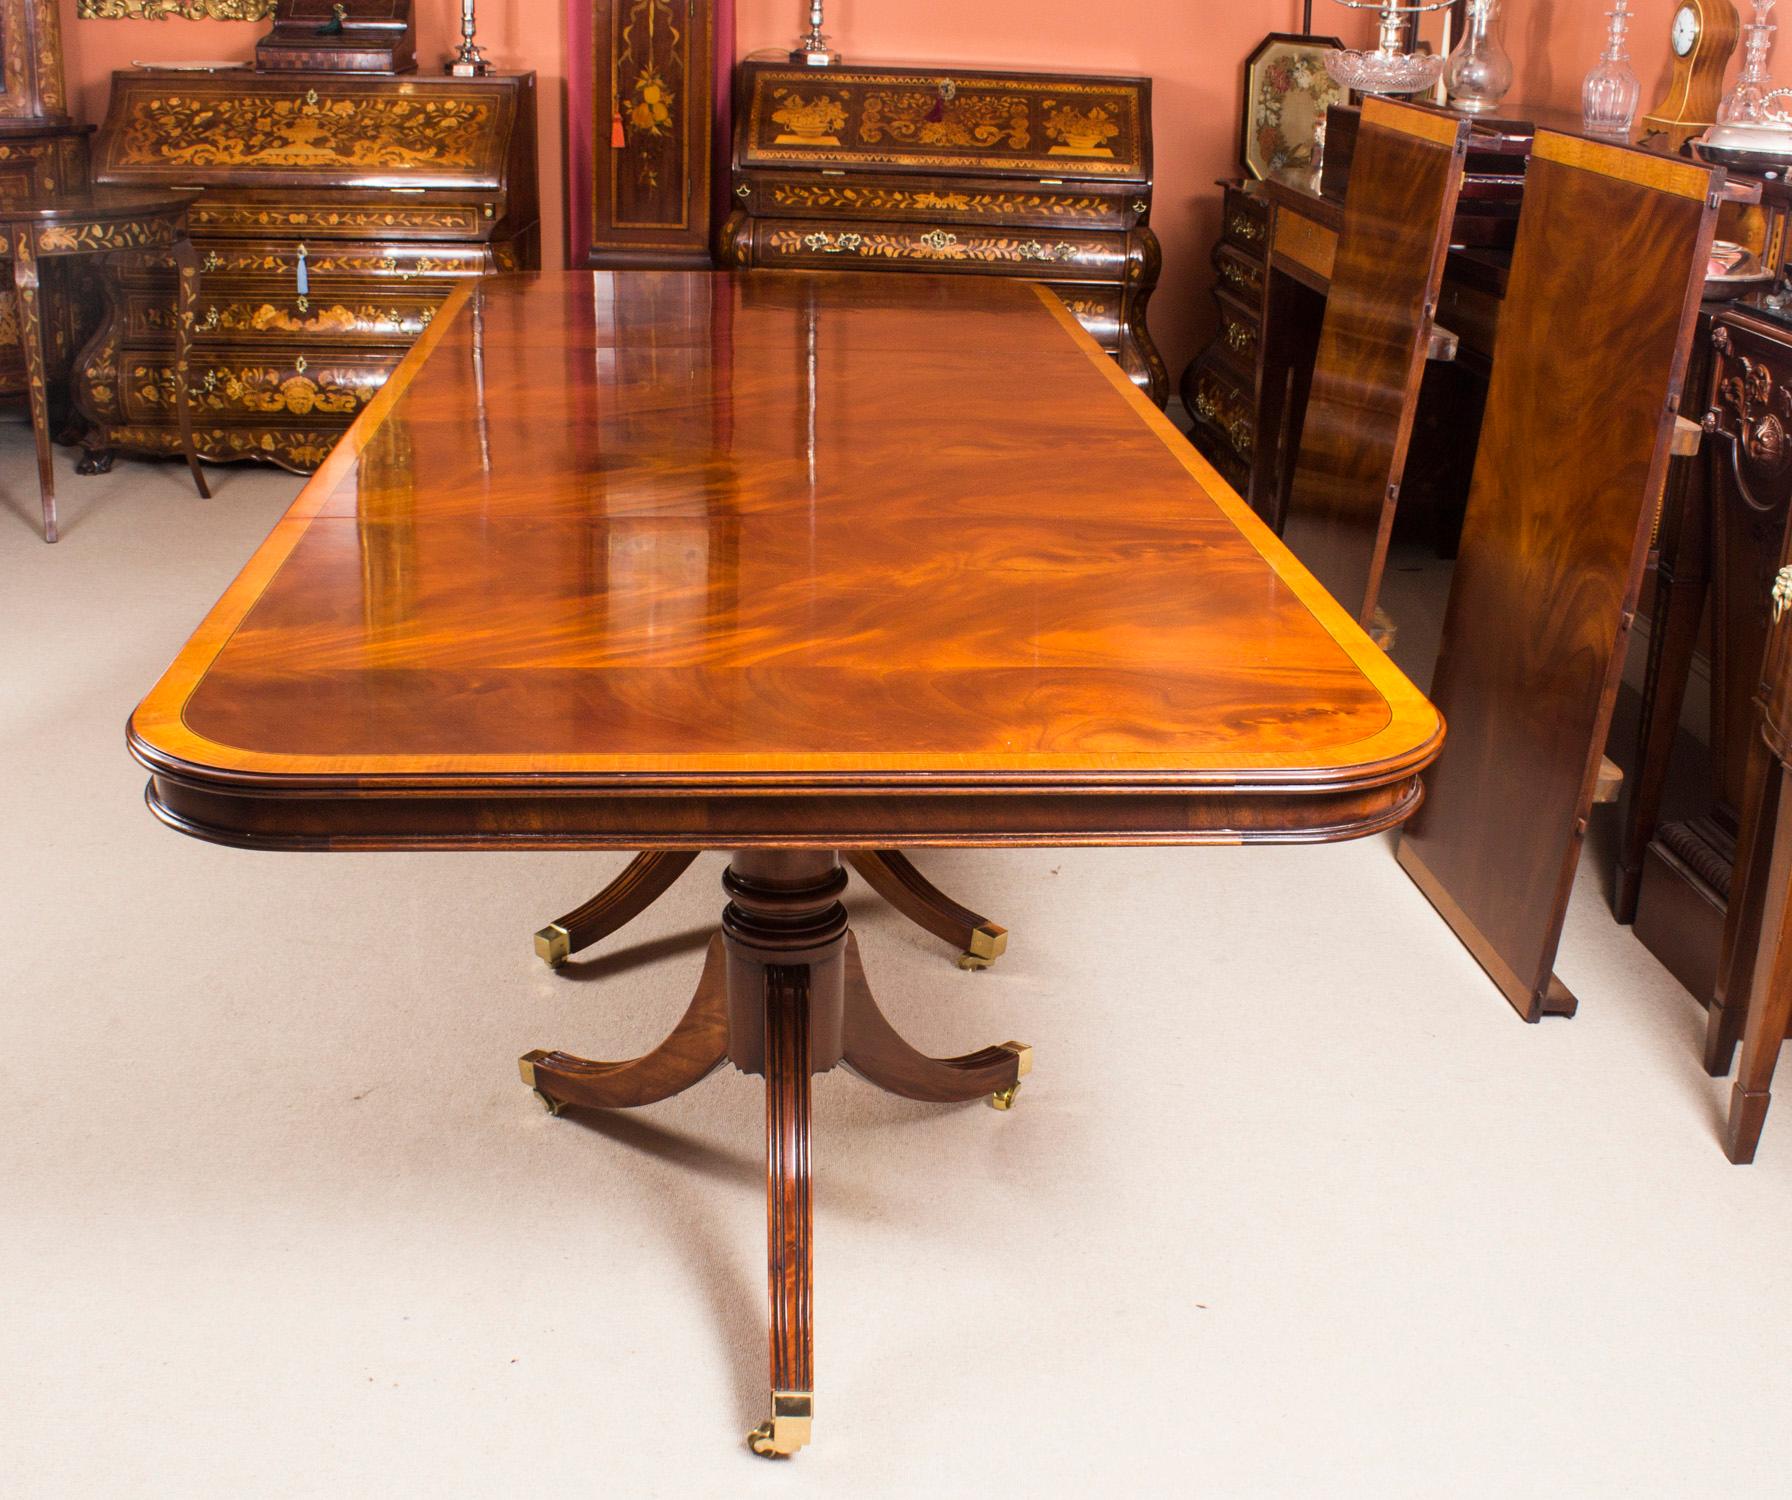 Vintage 14ft Regency Style Dining Table Inlaid Flame Mahogany 20th Century For Sale 6